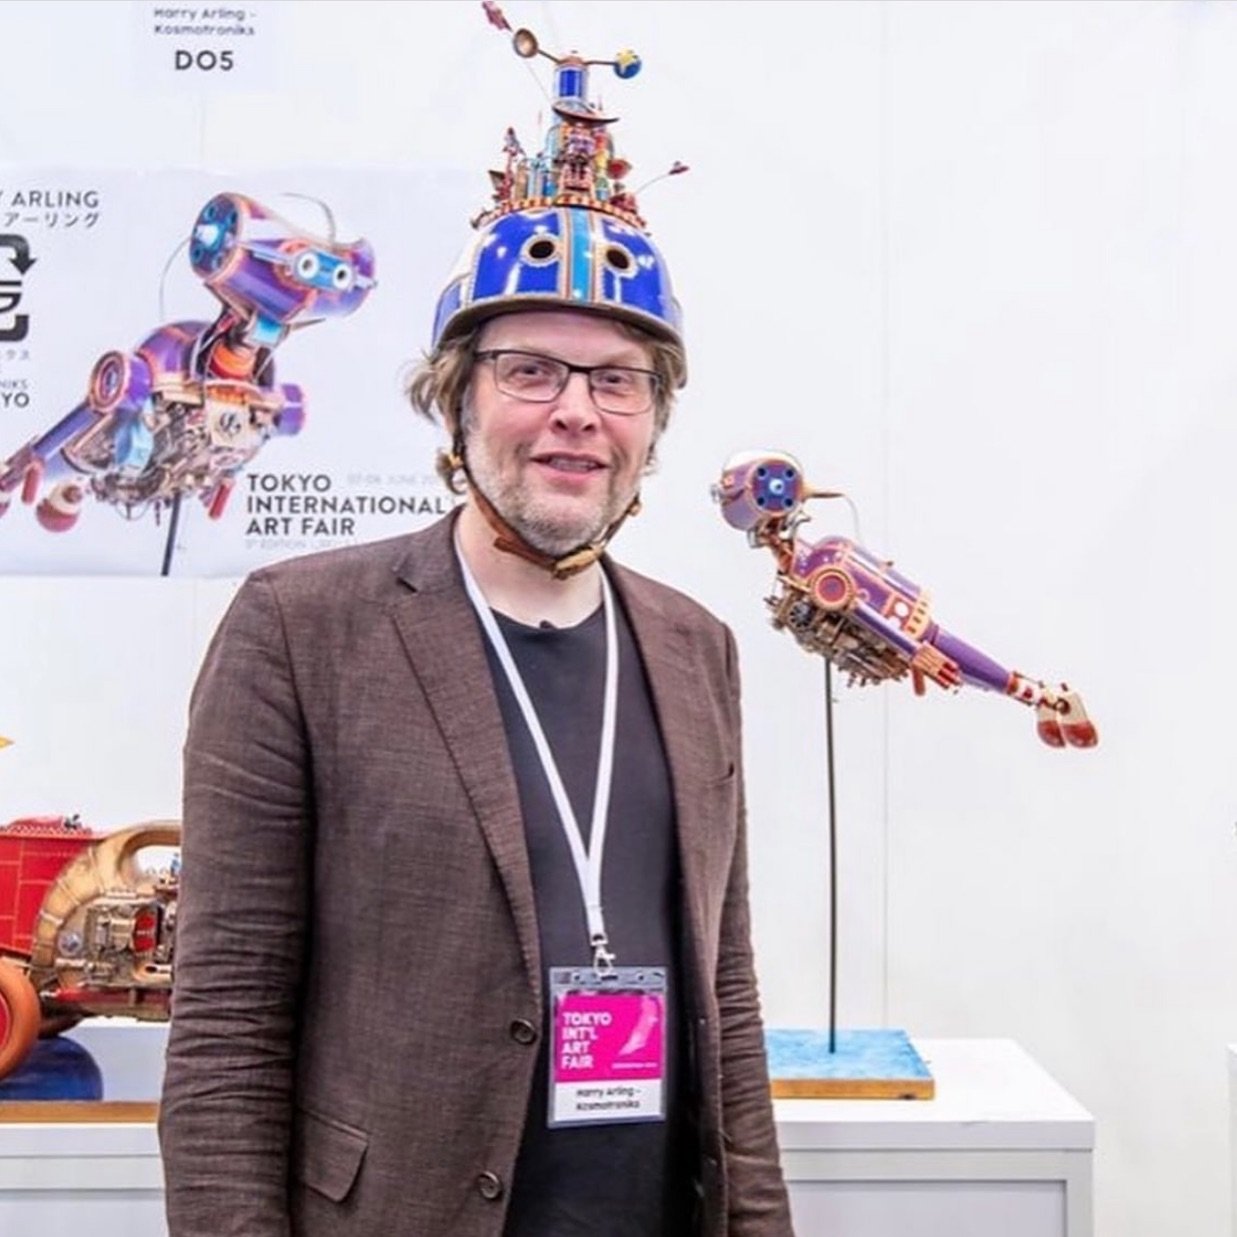 Who remembers @kosmotroniks 💯🎌🫶🏼

Unique connections are made at the 7th edition of the Tokyo International Art Fair 29-30 Nov 2024. www.tokyoartfair.com

Looking forward to seeing you there! Get your tickets online #artcollector #buyart #vipart 